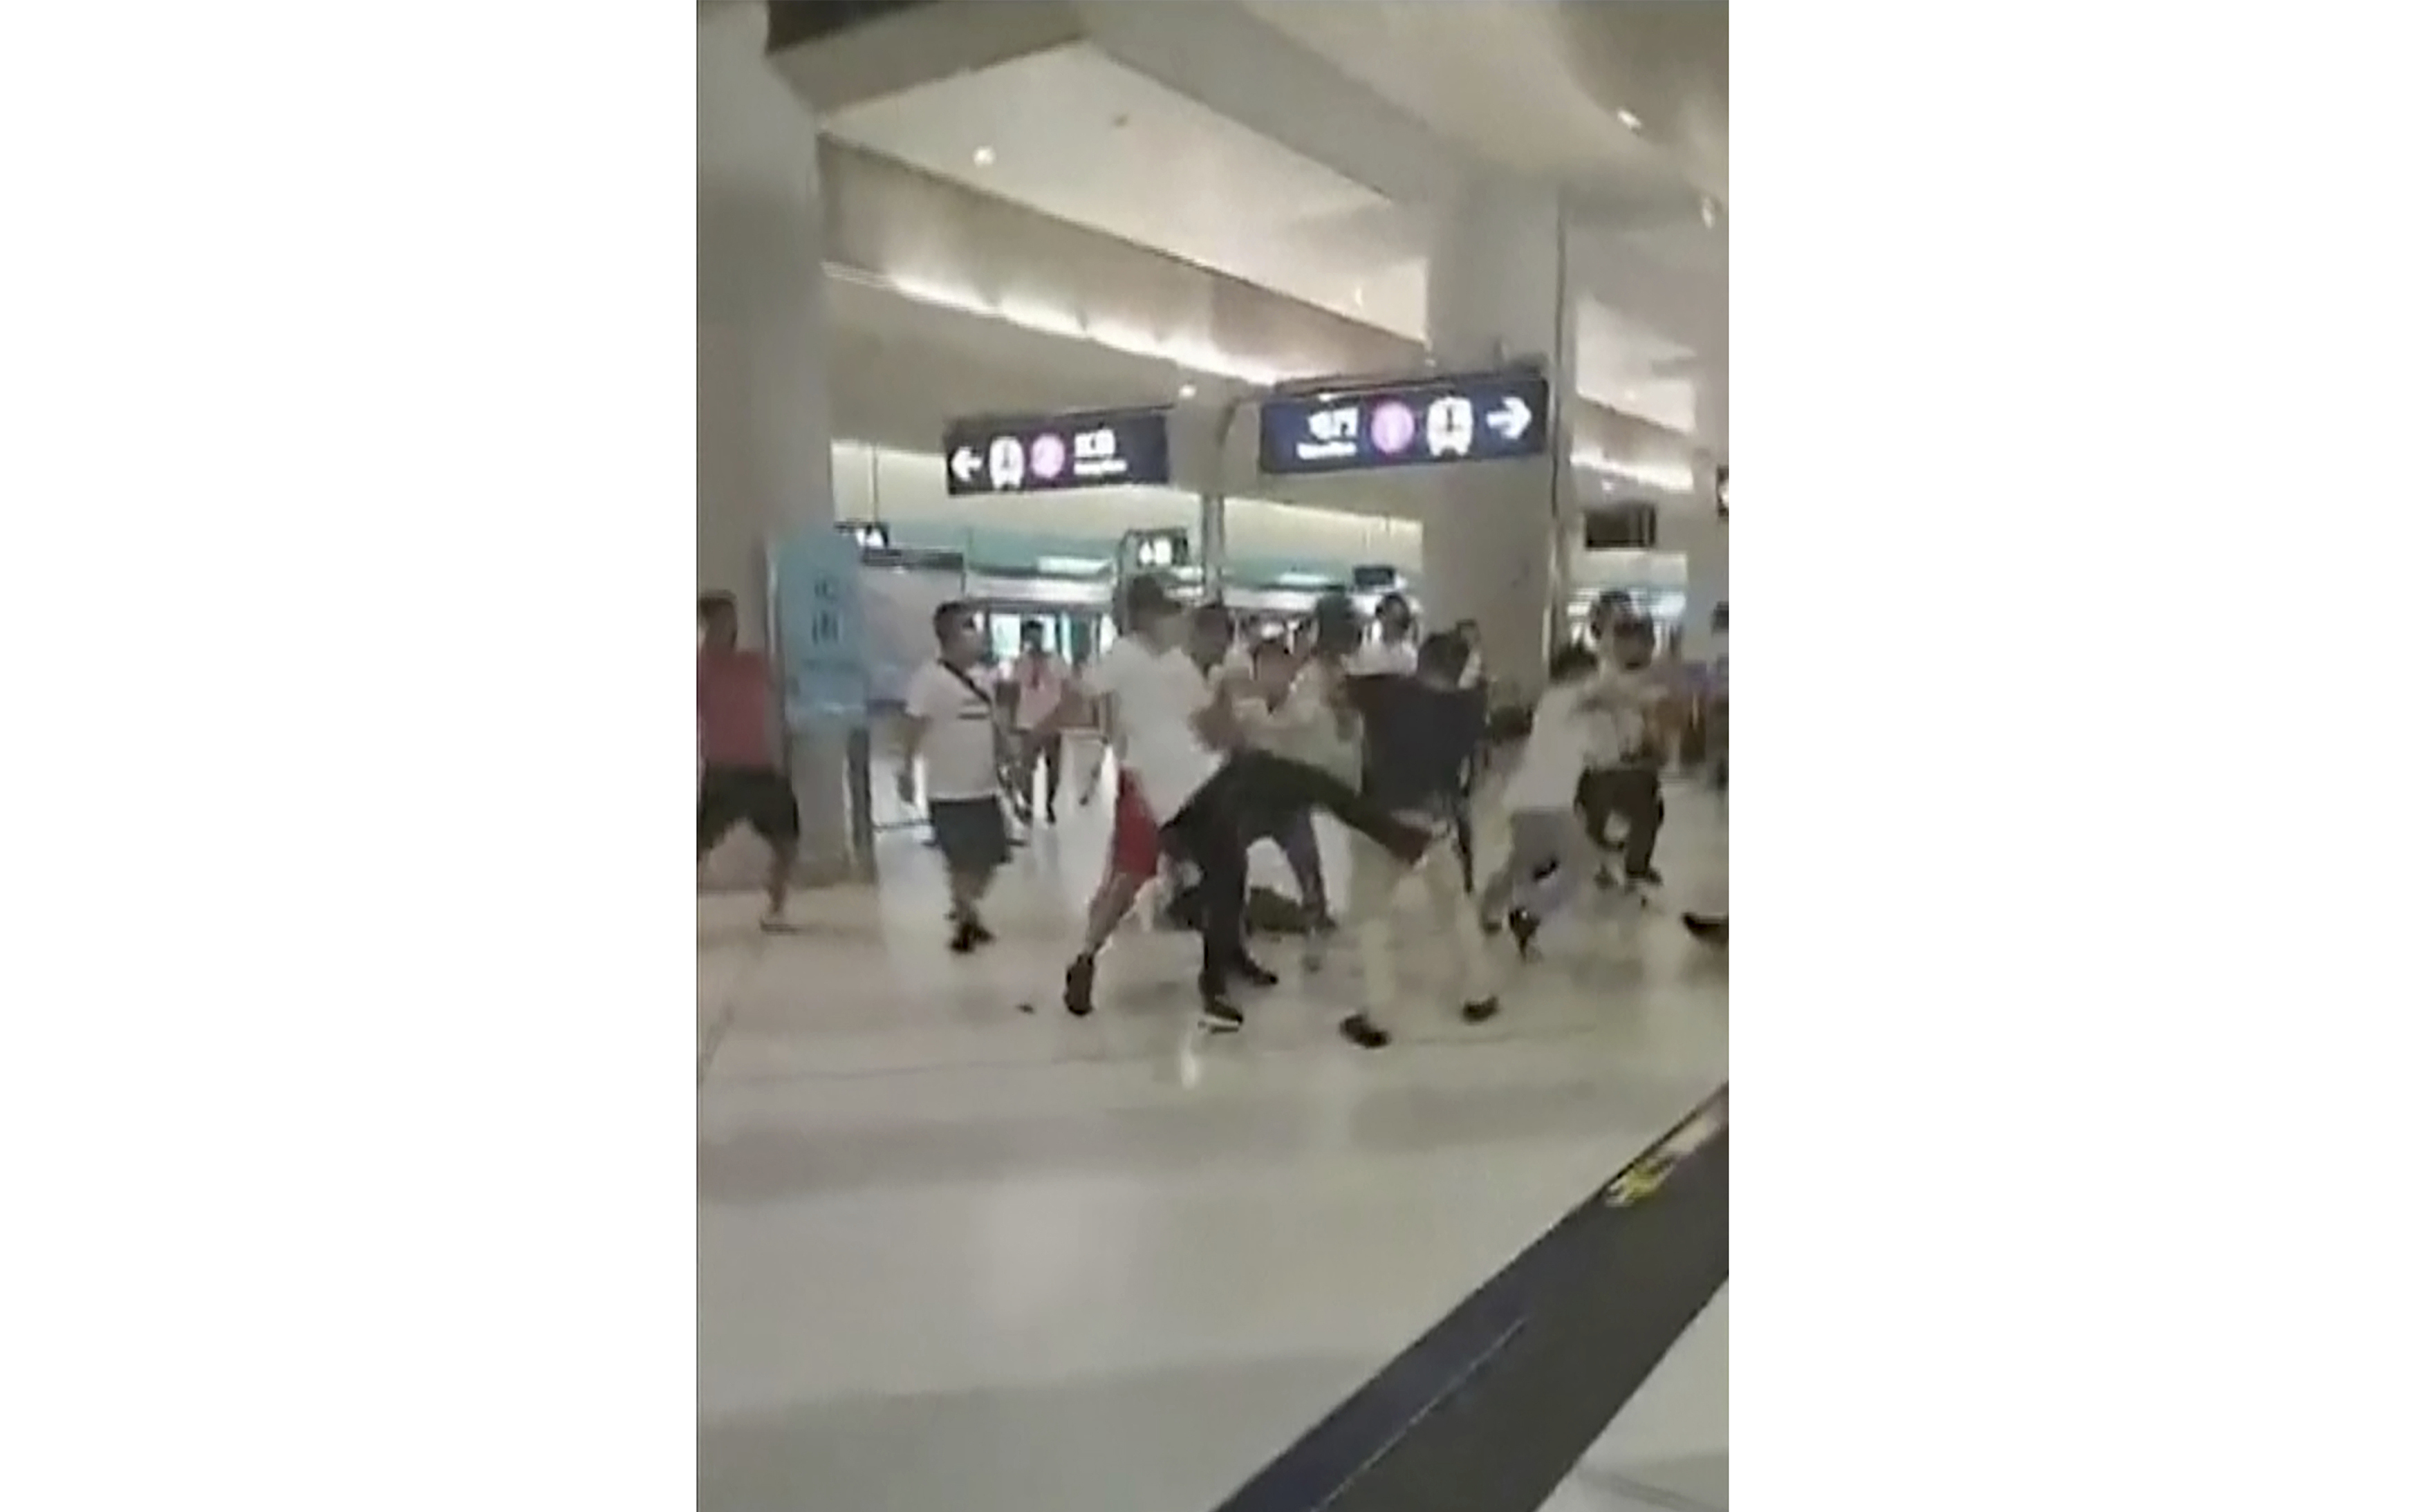 This image taken from a video shows confrontation between masked assailants and protesters at Yuen Long MTR train station in Hong Kong on July 21, 2019. (Lam Cheuk-ting—AP)